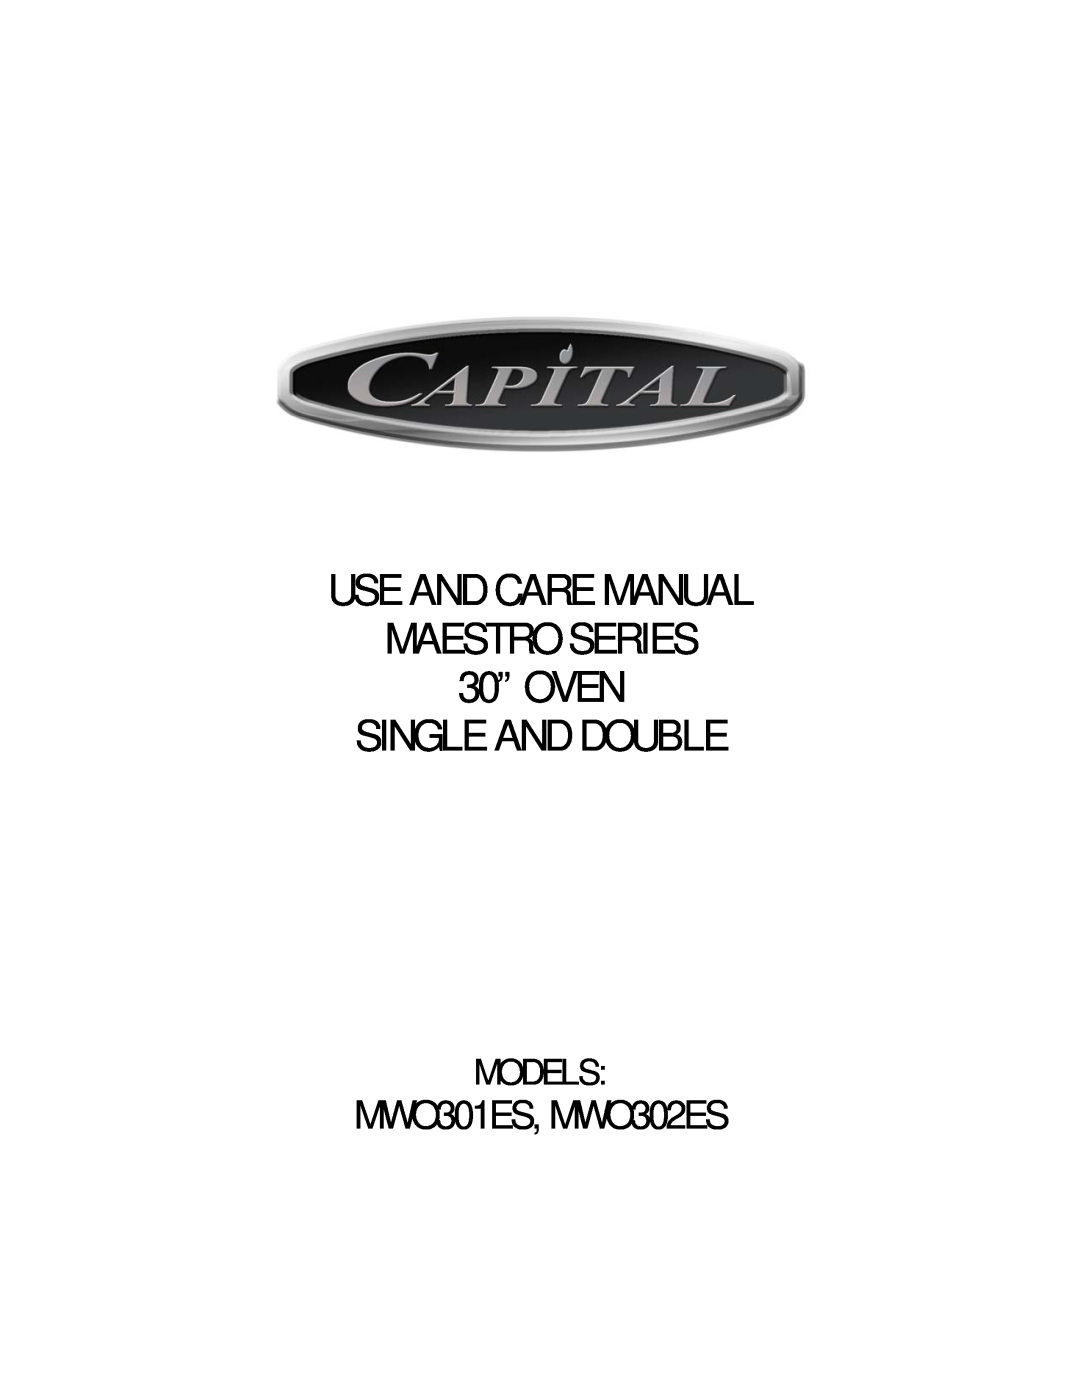 Capital Cooking manual USE AND CARE MANUAL MAESTRO SERIES 30” OVEN, Single And Double, MWO301ES, MWO302ES, Models 